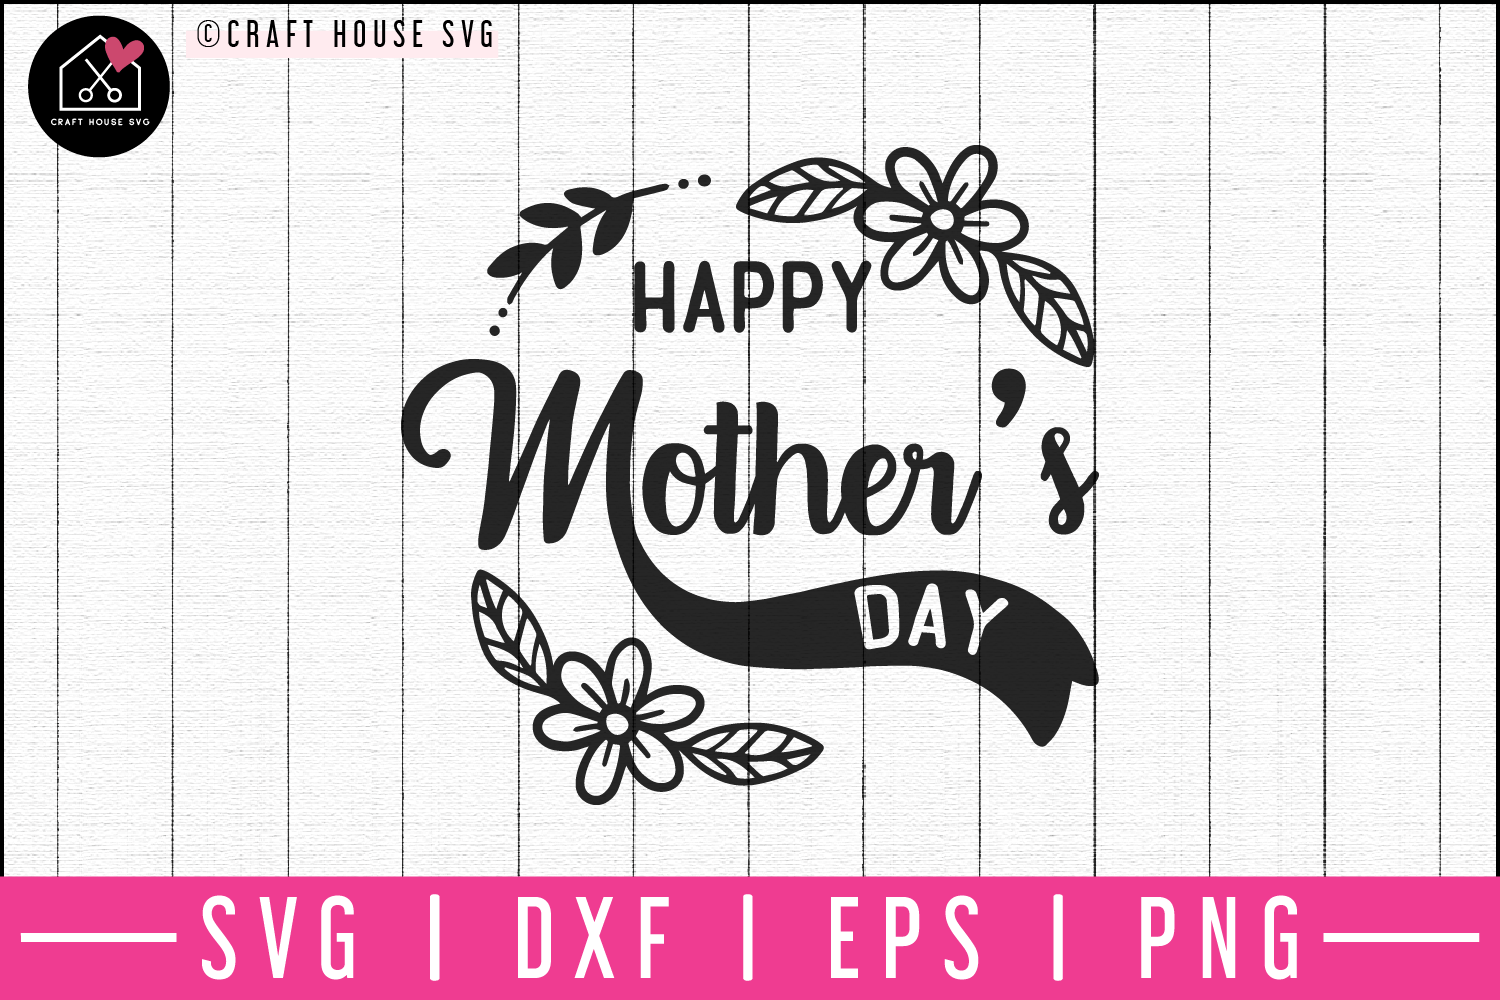 Happy mothers day SVG | M52F Craft House SVG - SVG files for Cricut and Silhouette